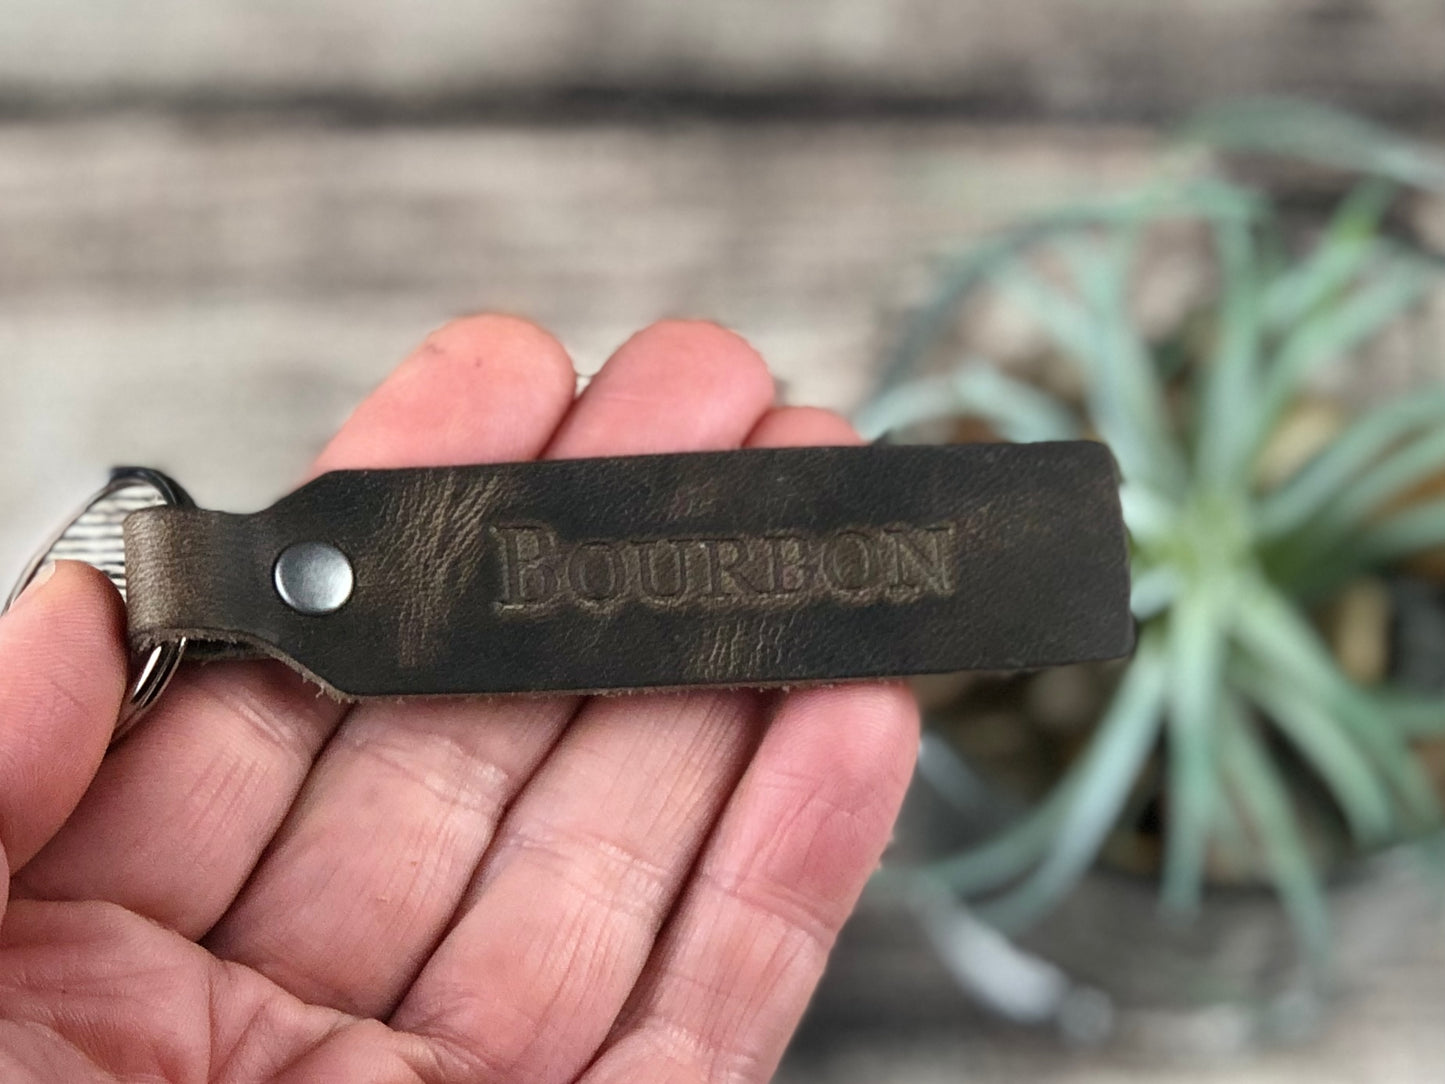 Keychain - Bourbon - in various leathers